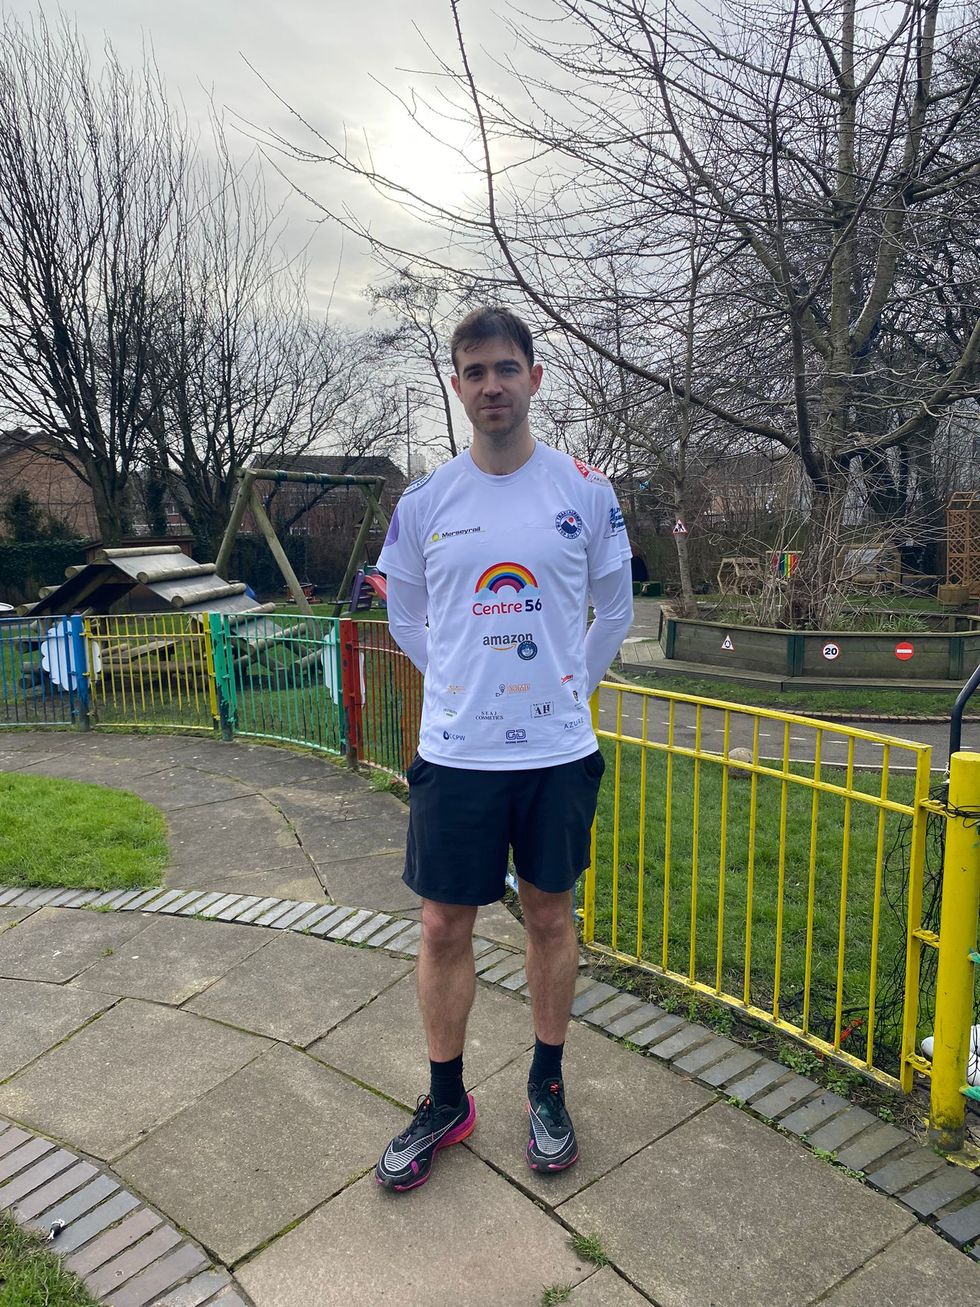 Runner on track to raise more than £20,000 after railway challenge